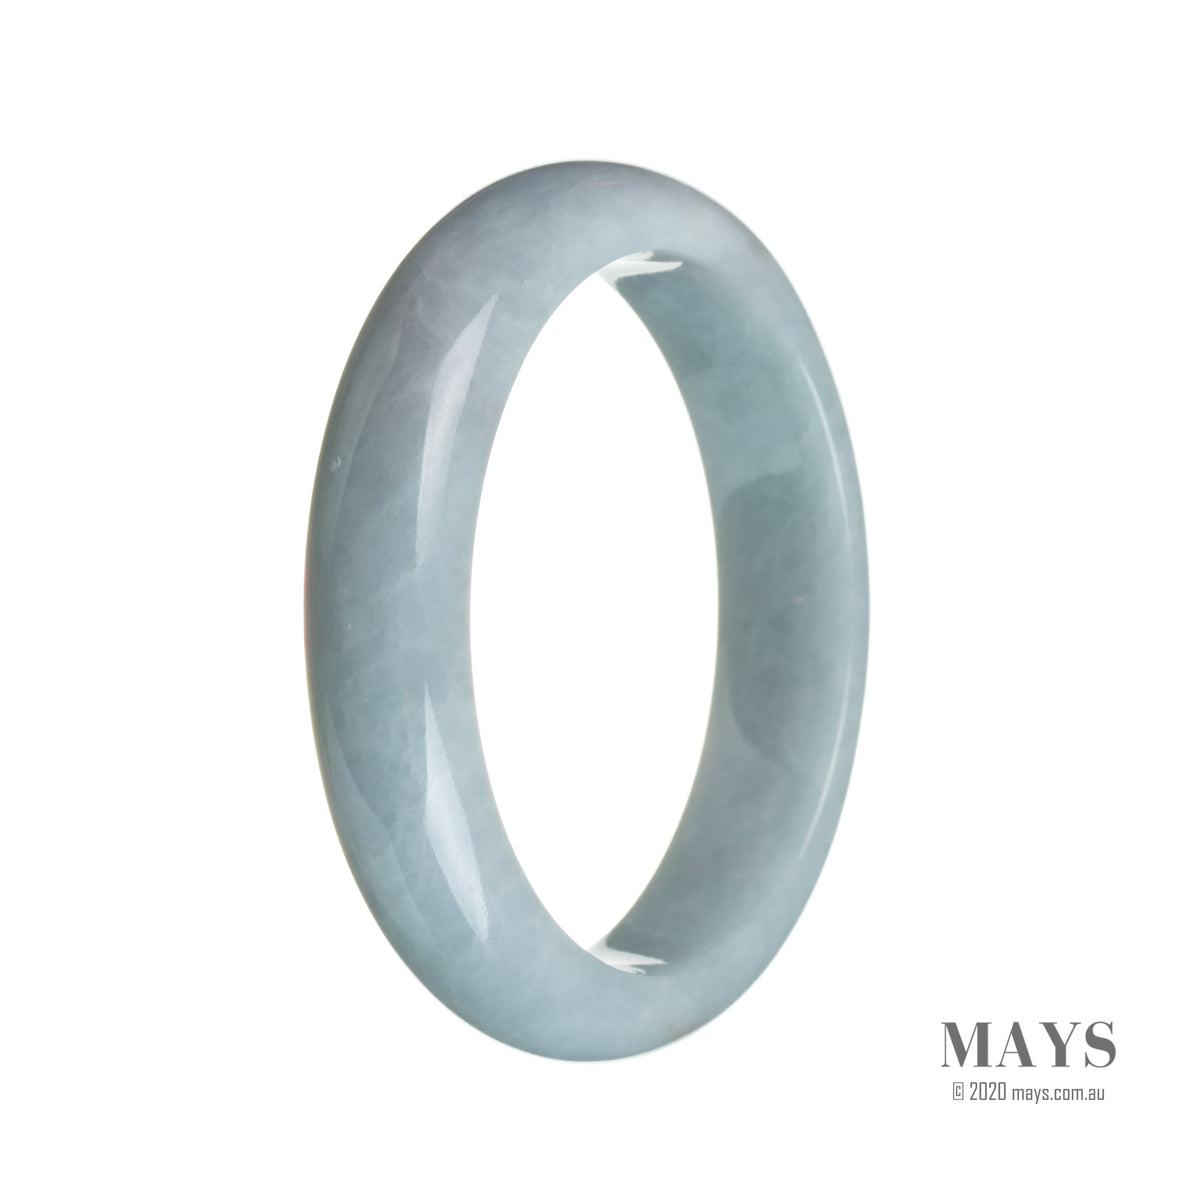 Image: A bluish lavender Burma Jade bangle with a half moon shape, measuring 59mm in diameter. It features an authentic Type A jade, known for its high quality and natural beauty. Created by MAYS, a trusted brand in jade jewelry.